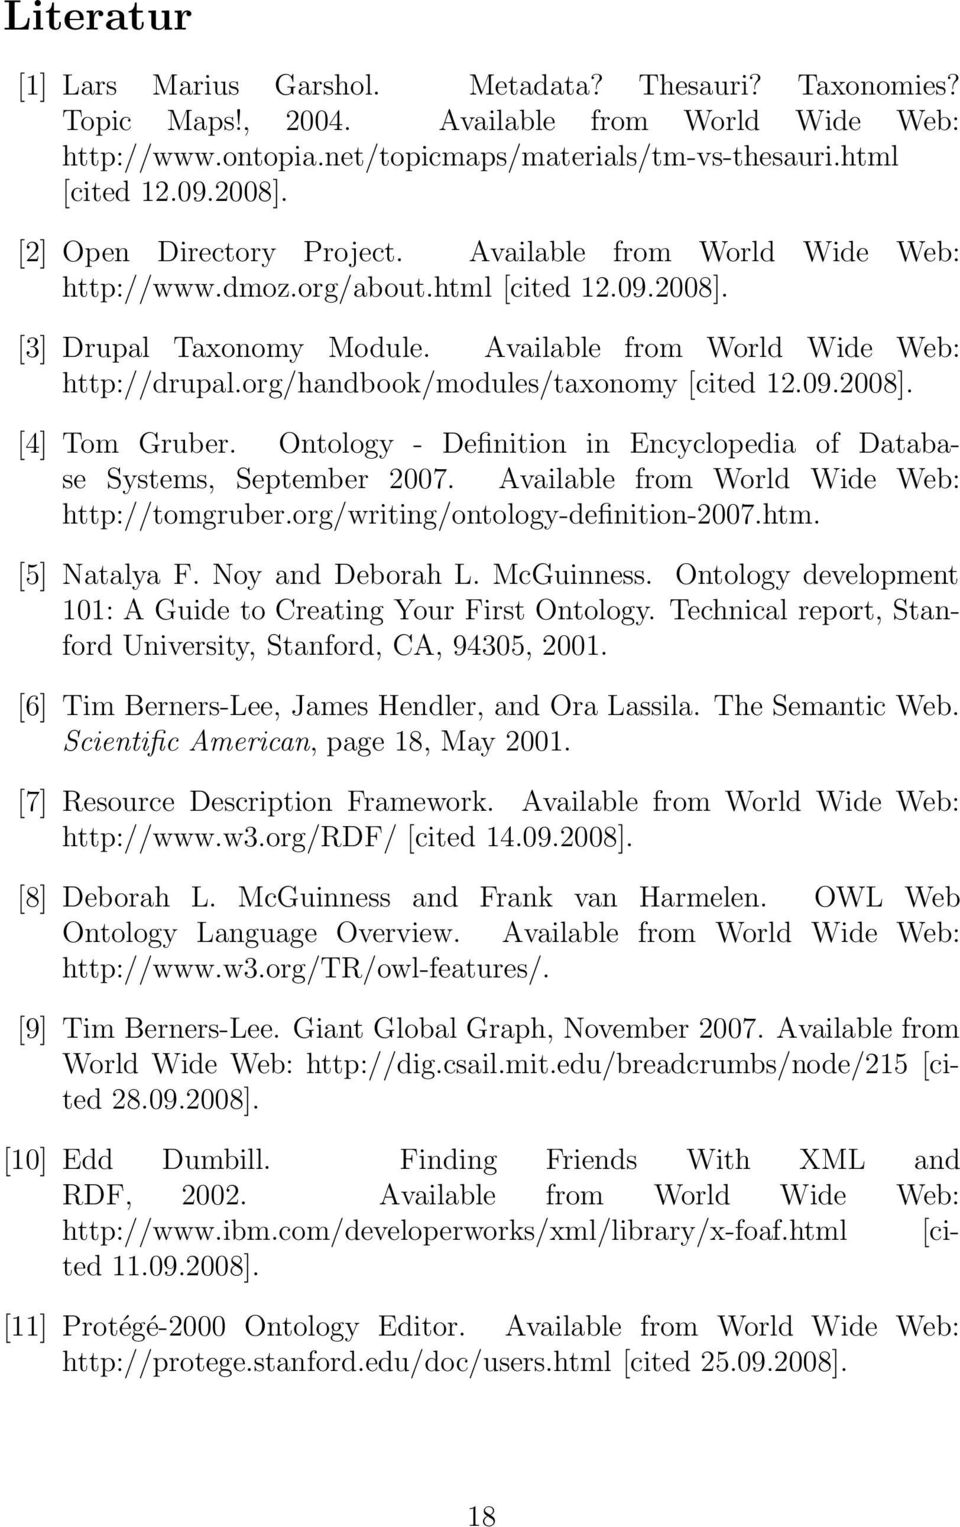 org/handbook/modules/taxonomy [cited 12.09.2008]. [4] Tom Gruber. Ontology - Definition in Encyclopedia of Database Systems, September 2007. Available from World Wide Web: http://tomgruber.